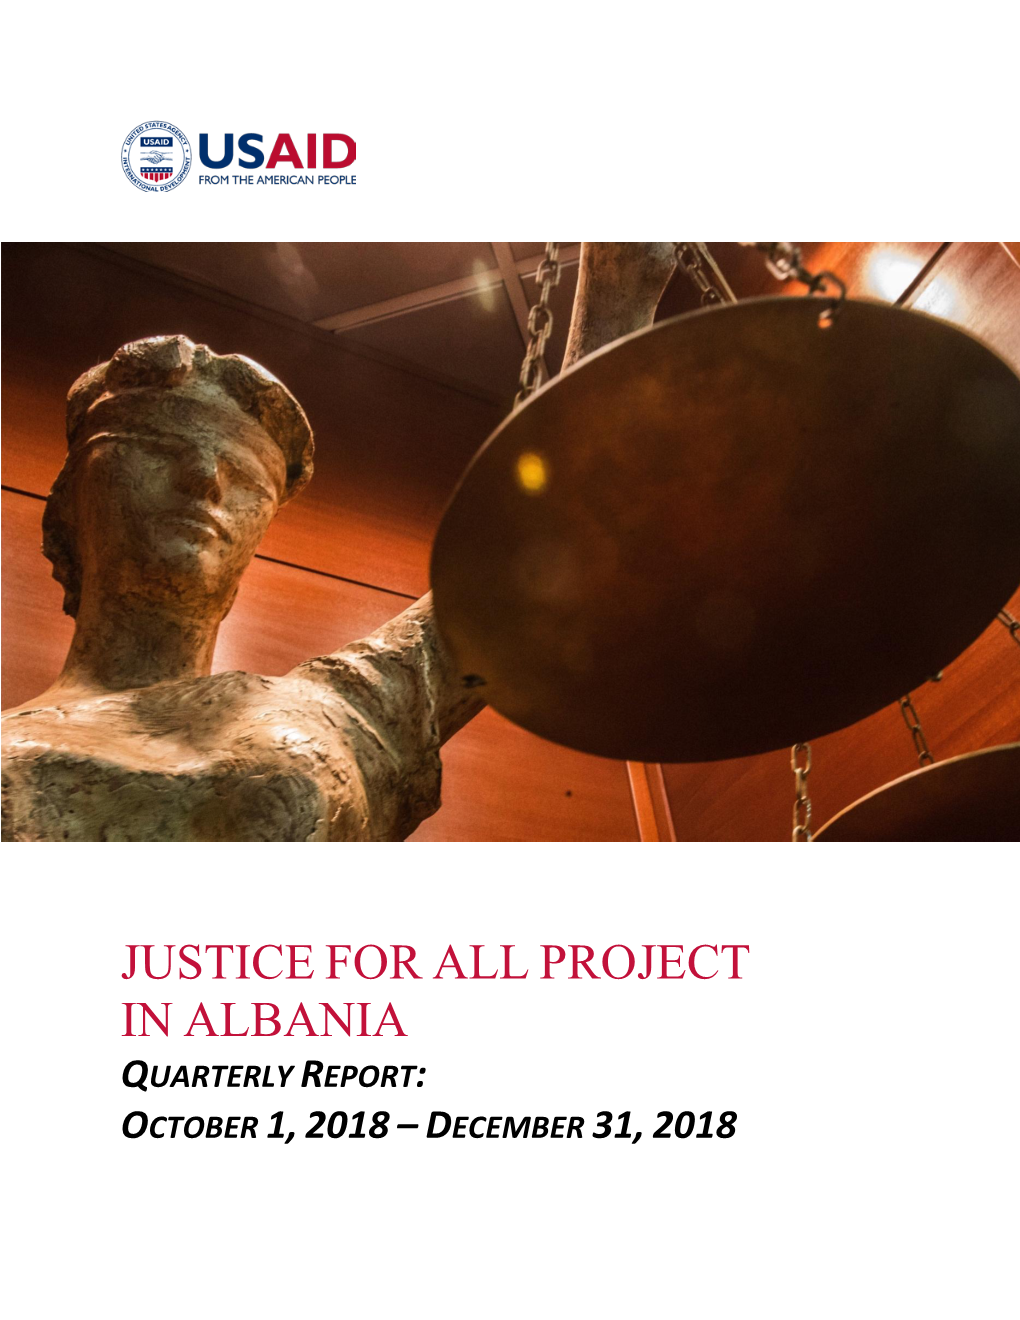 Justice for All Project in Albania Quarterly Report: October 1, 2018 – December 31, 2018